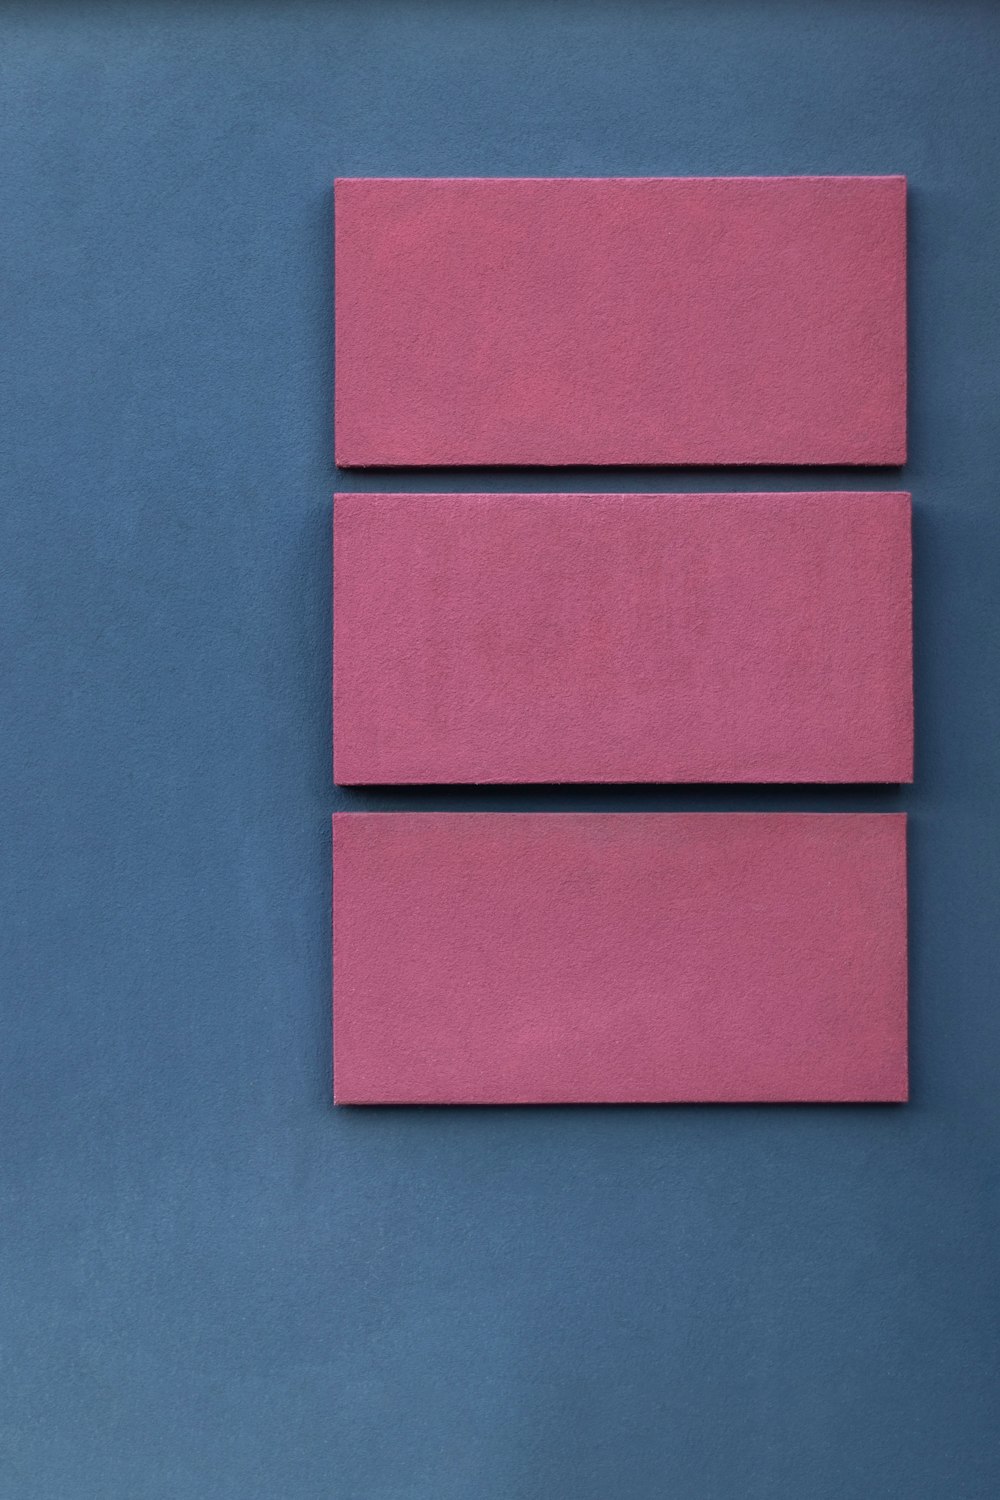 pink boards on blue surface